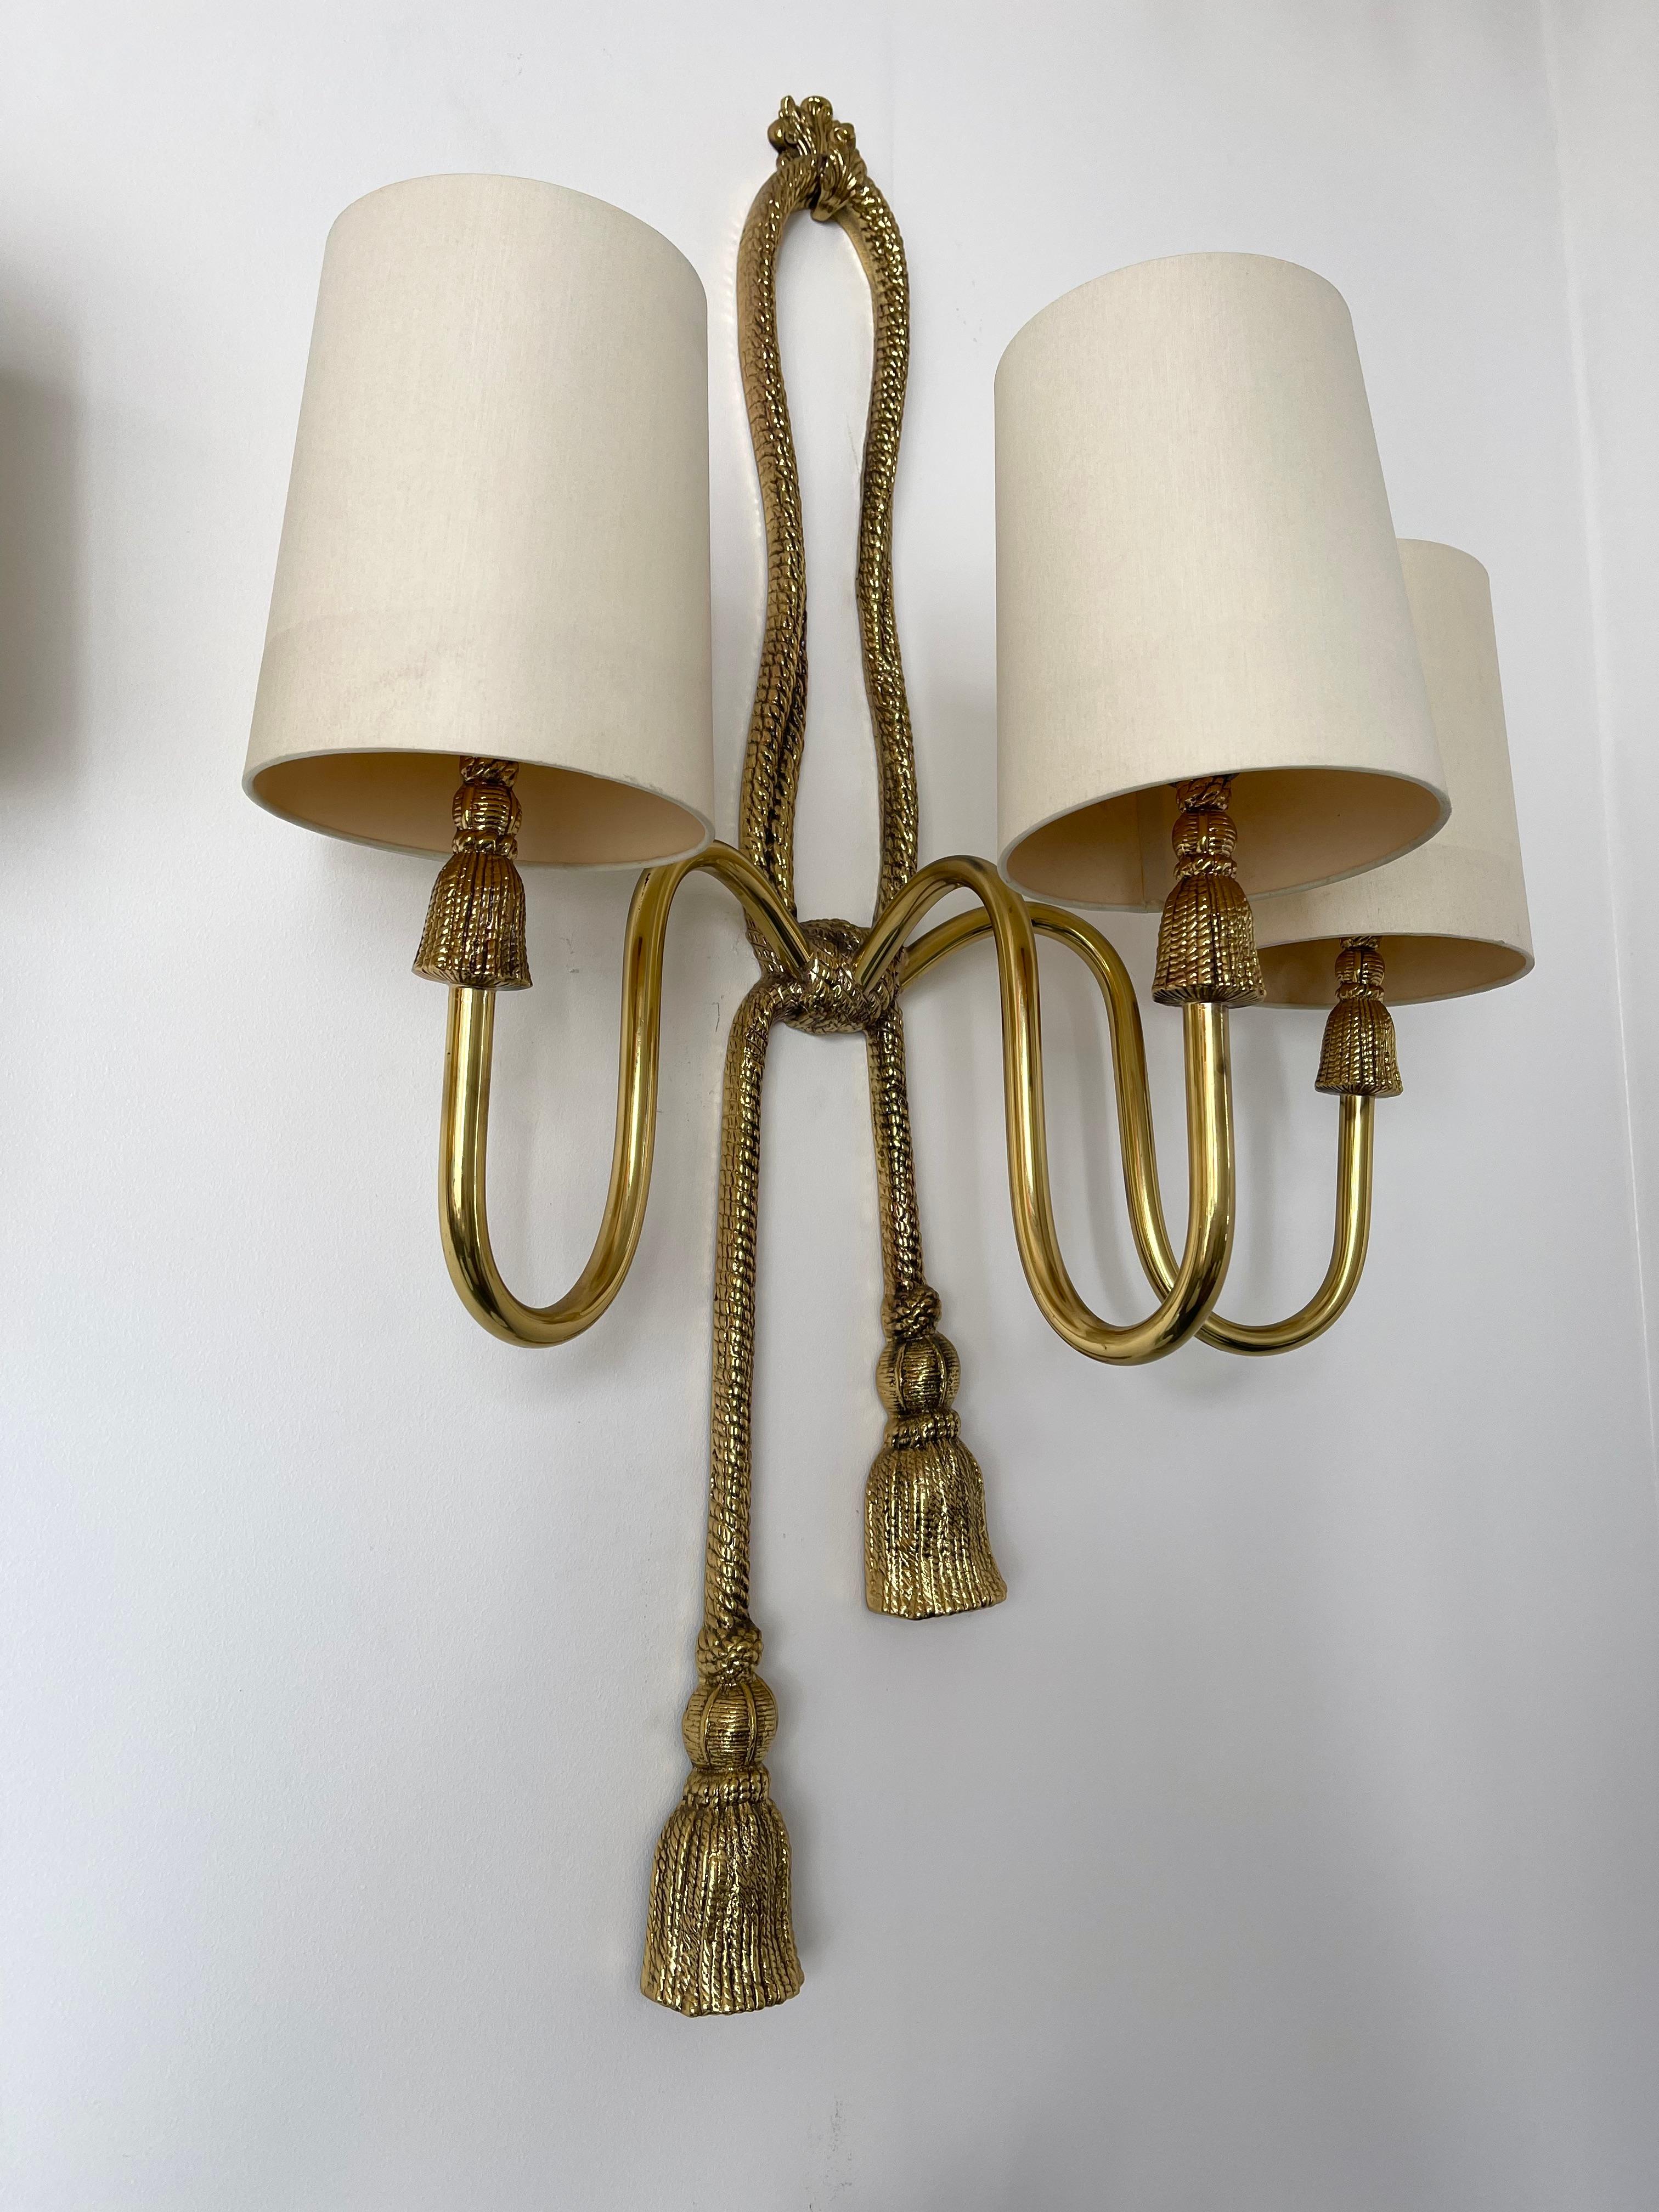 Rare large 3 lights neo classical bronze and brass Knot node Knod wall lights lamps lightning sconces by the manufacture Valenti. The sconces are delivered with NEW ivory cotton shades based on the original shades. Stamp Valenti Made in Spain on